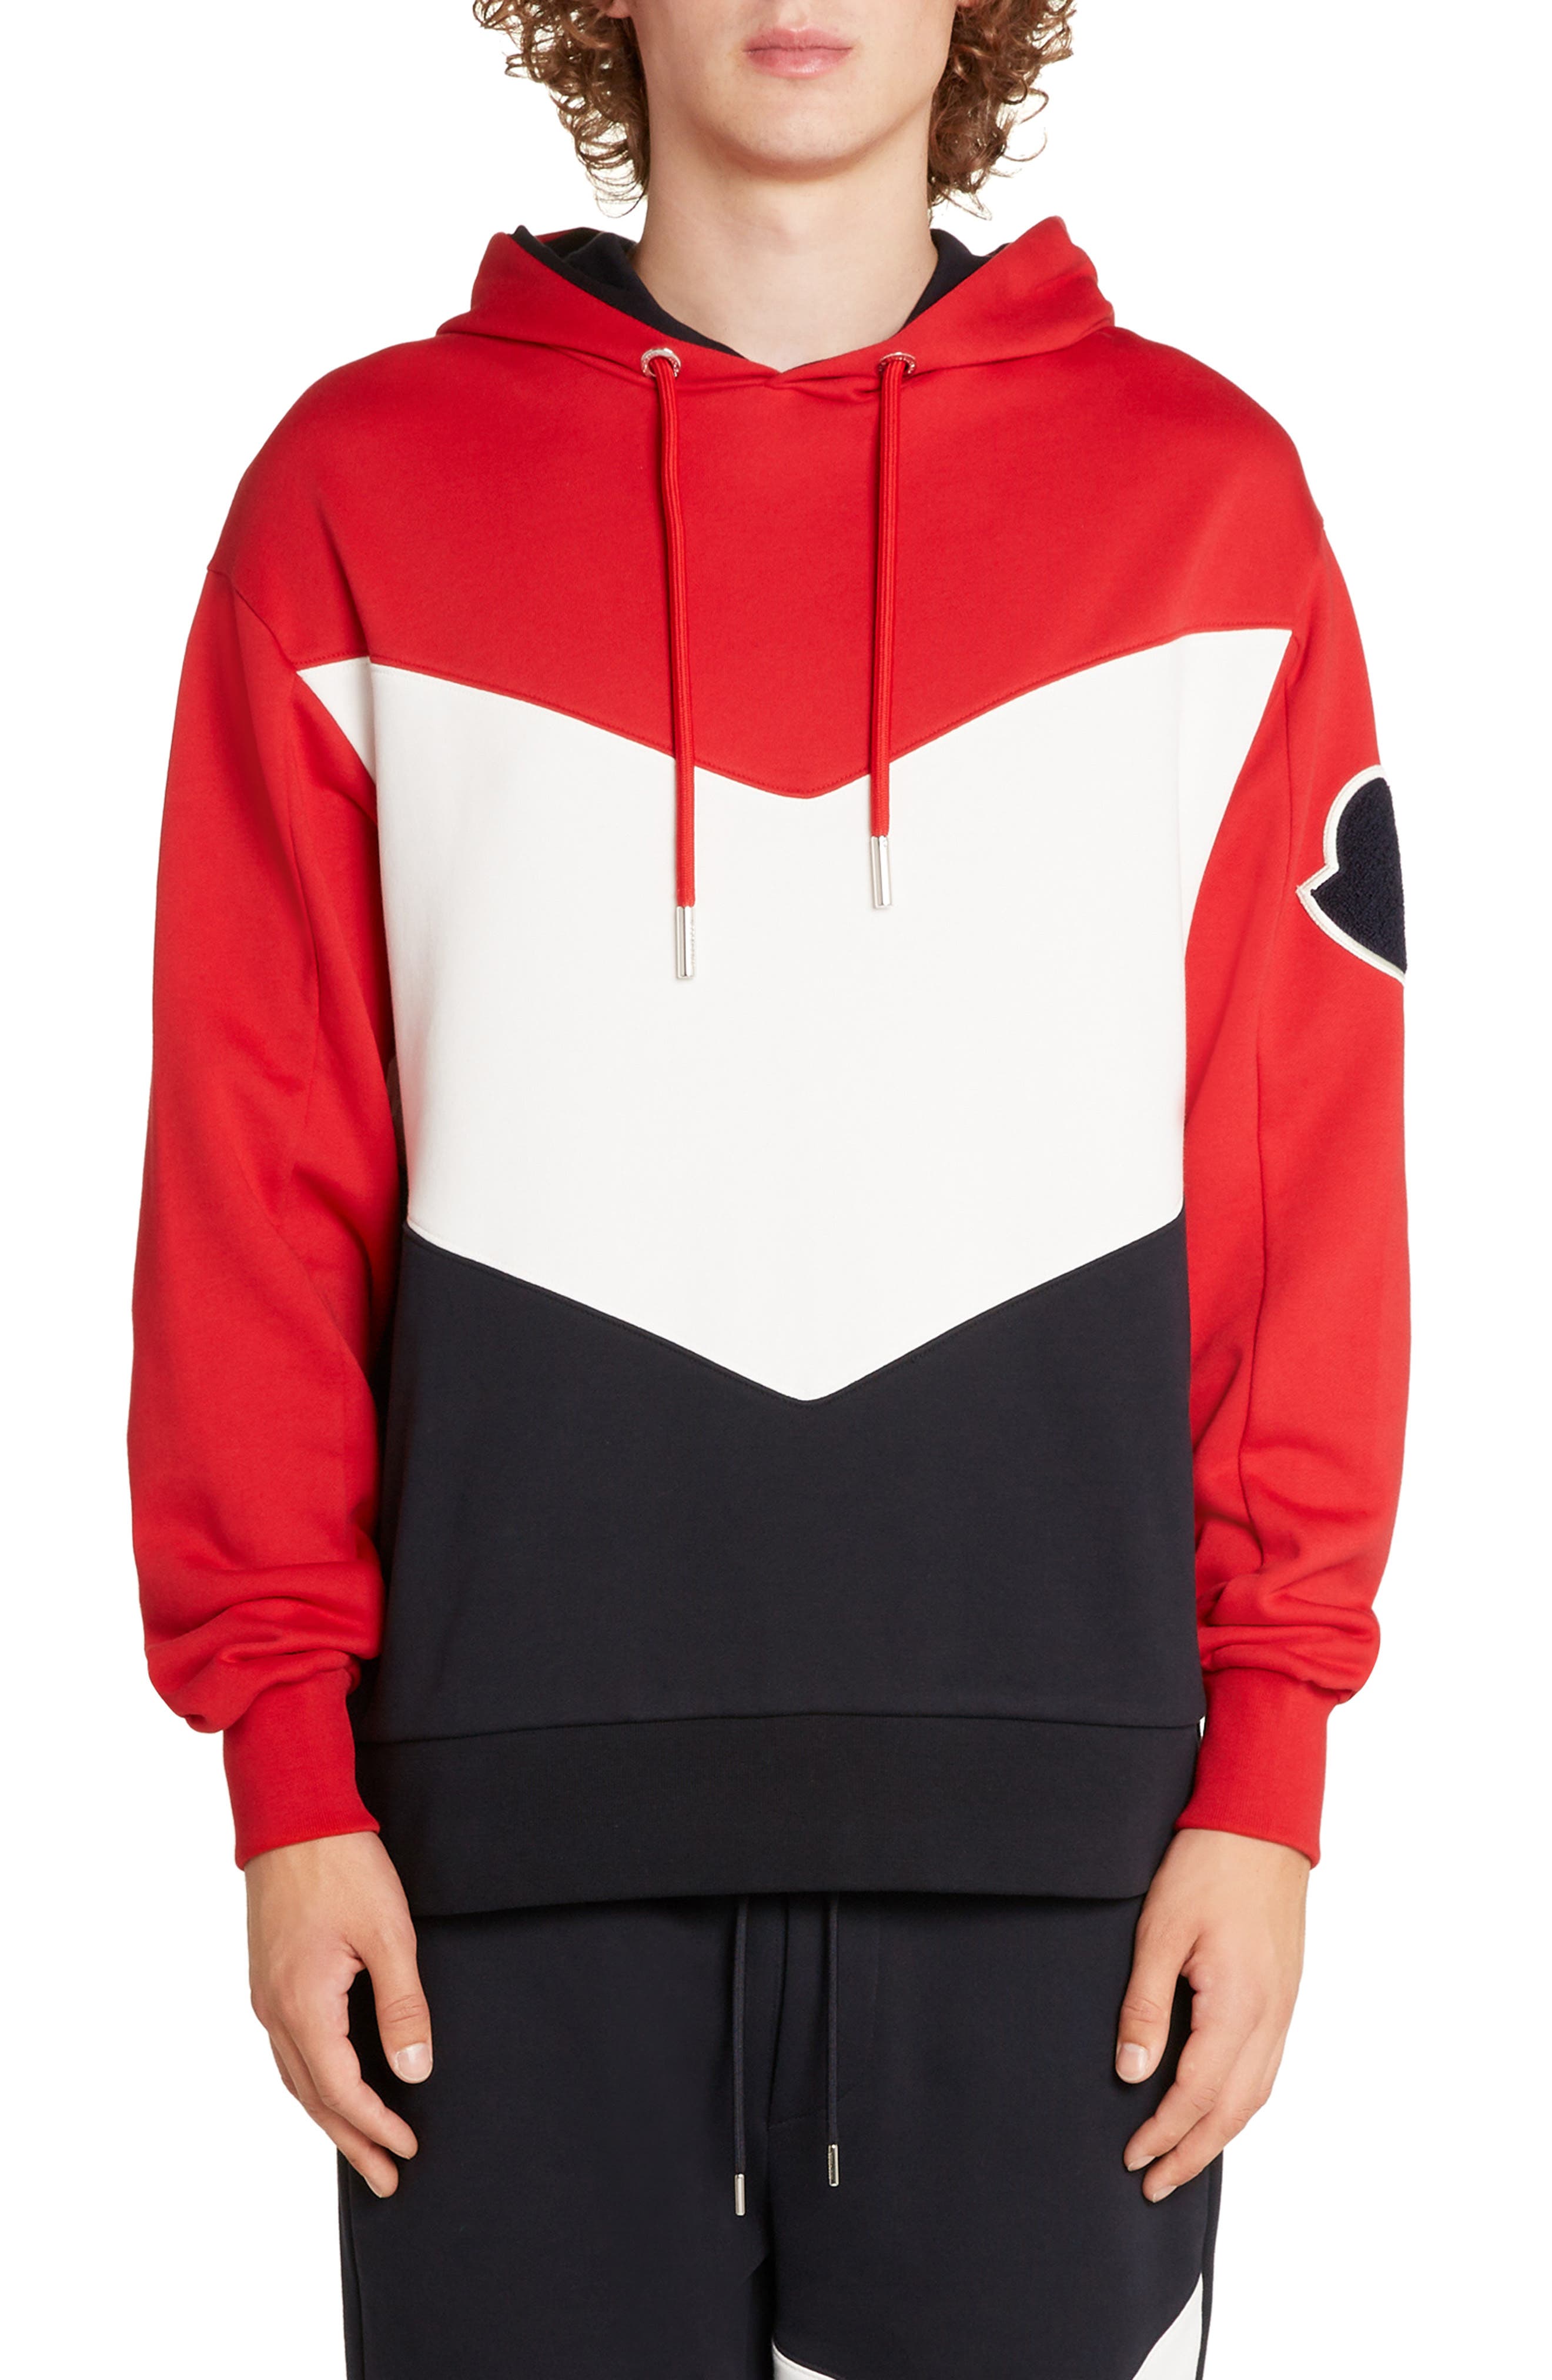 moncler pullover hoodie